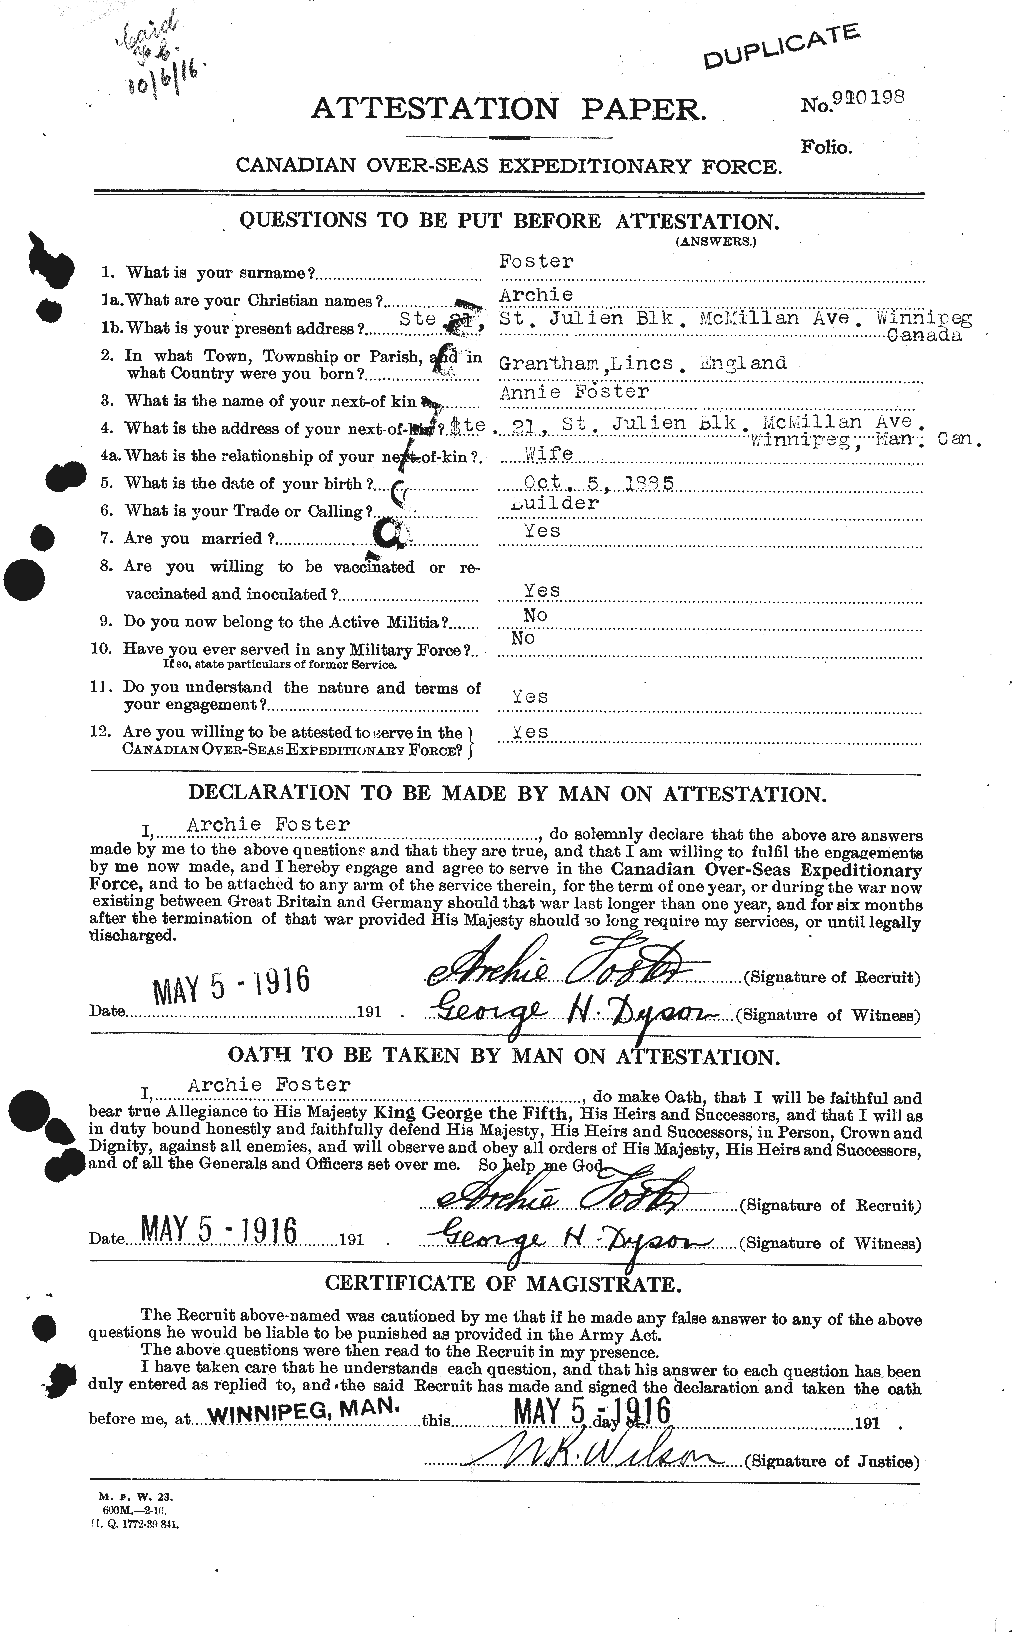 Personnel Records of the First World War - CEF 330461a